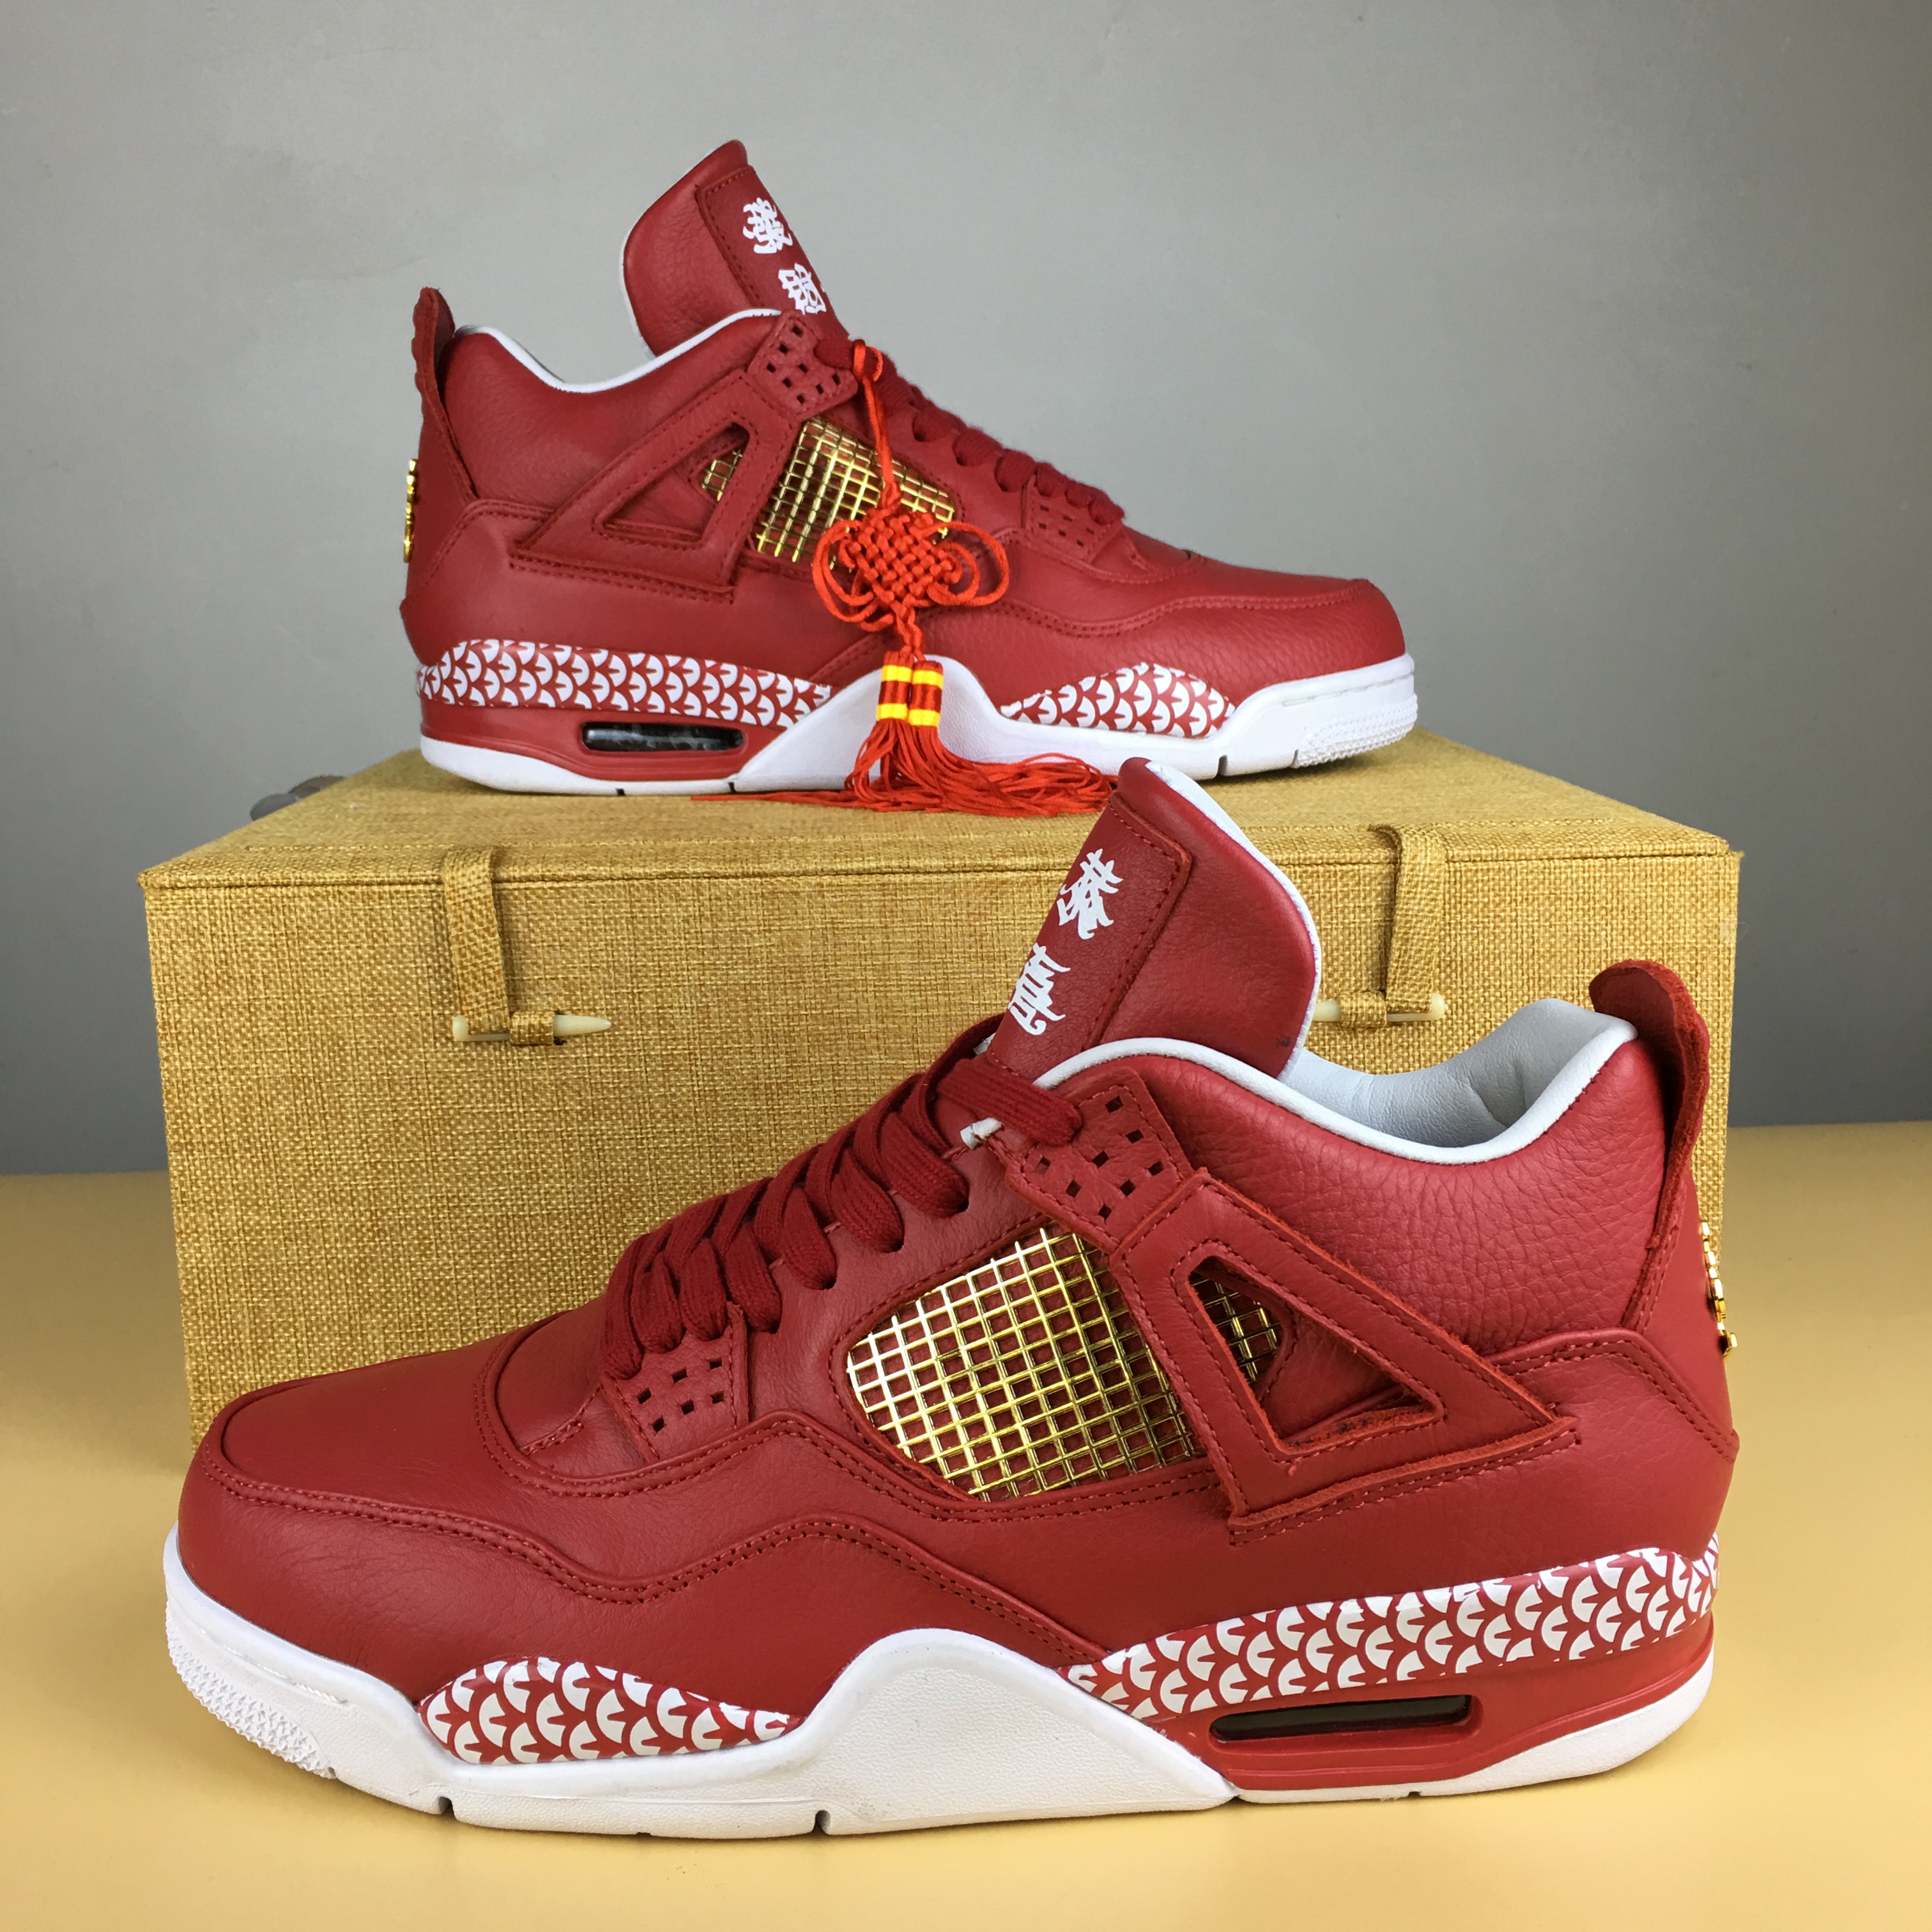 Latest Jordan 4 Kung Hei Fat Choi Red Shoes